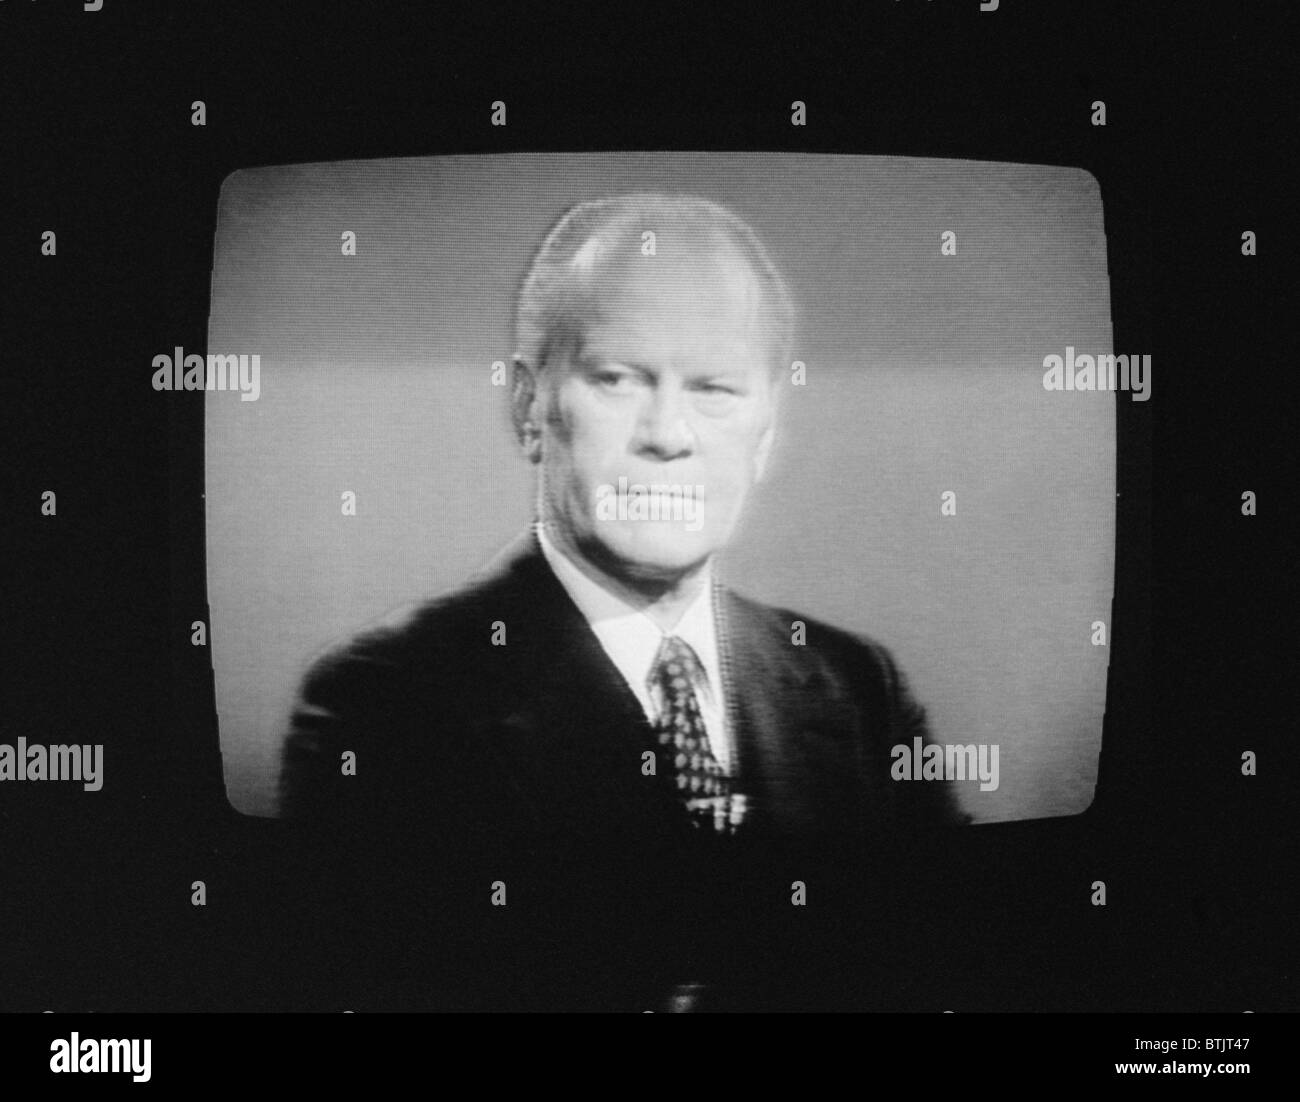 President Gerald Ford (1913-2006), U.S. President 1974-1977, on television during his first presidential debate in Philadelphia, Pennsylvania, photograph by Thomas J. O'Halloran, September 23, 1976. Stock Photo